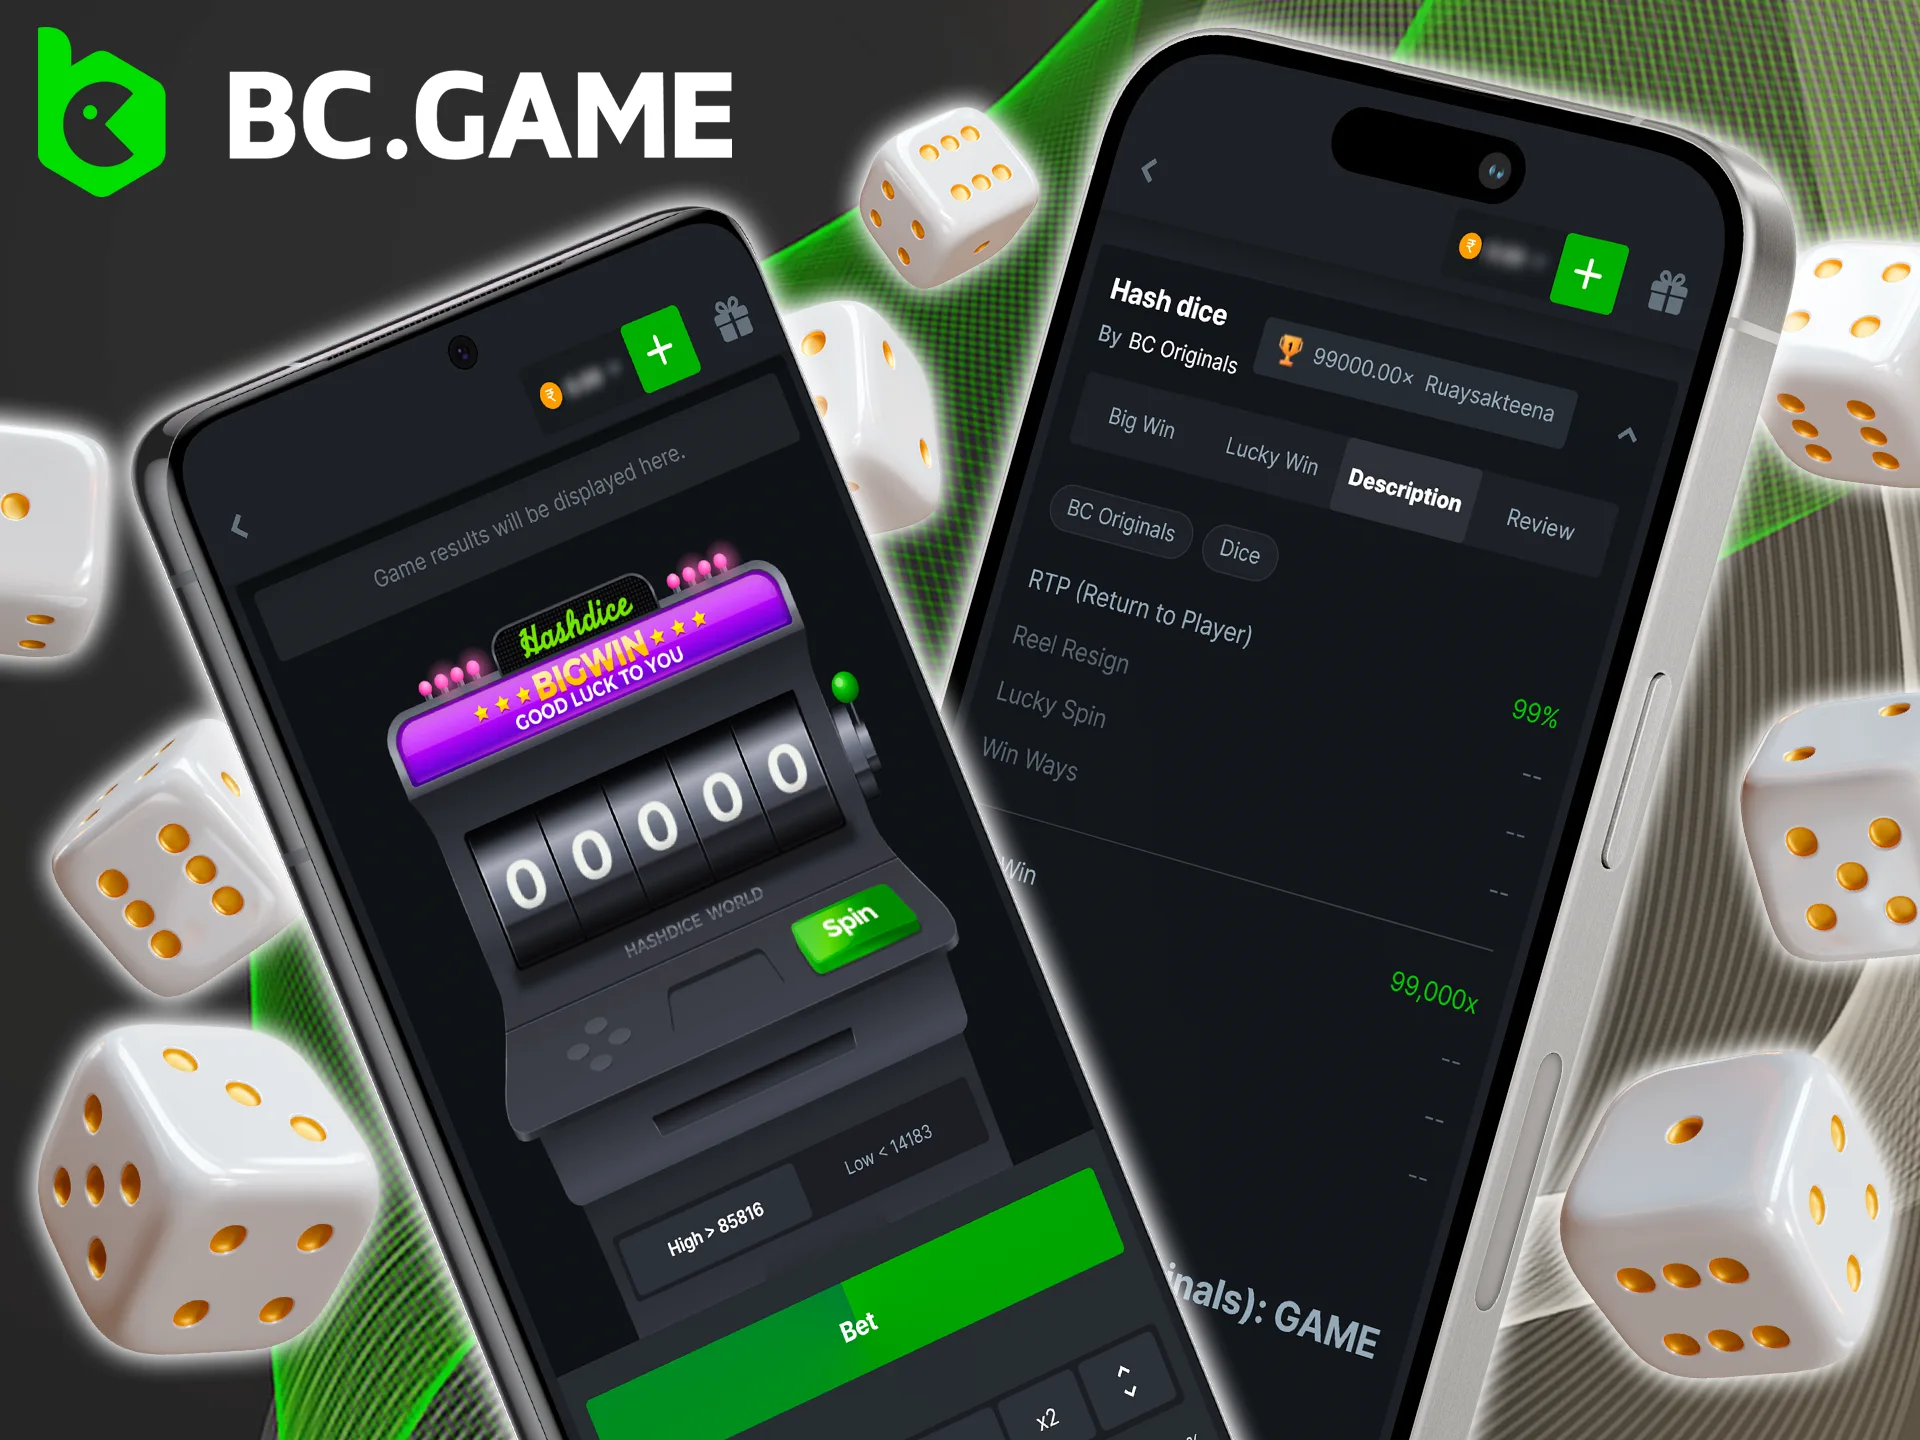 Download the BC Game app to be able to play Hash Dice from anywhere.